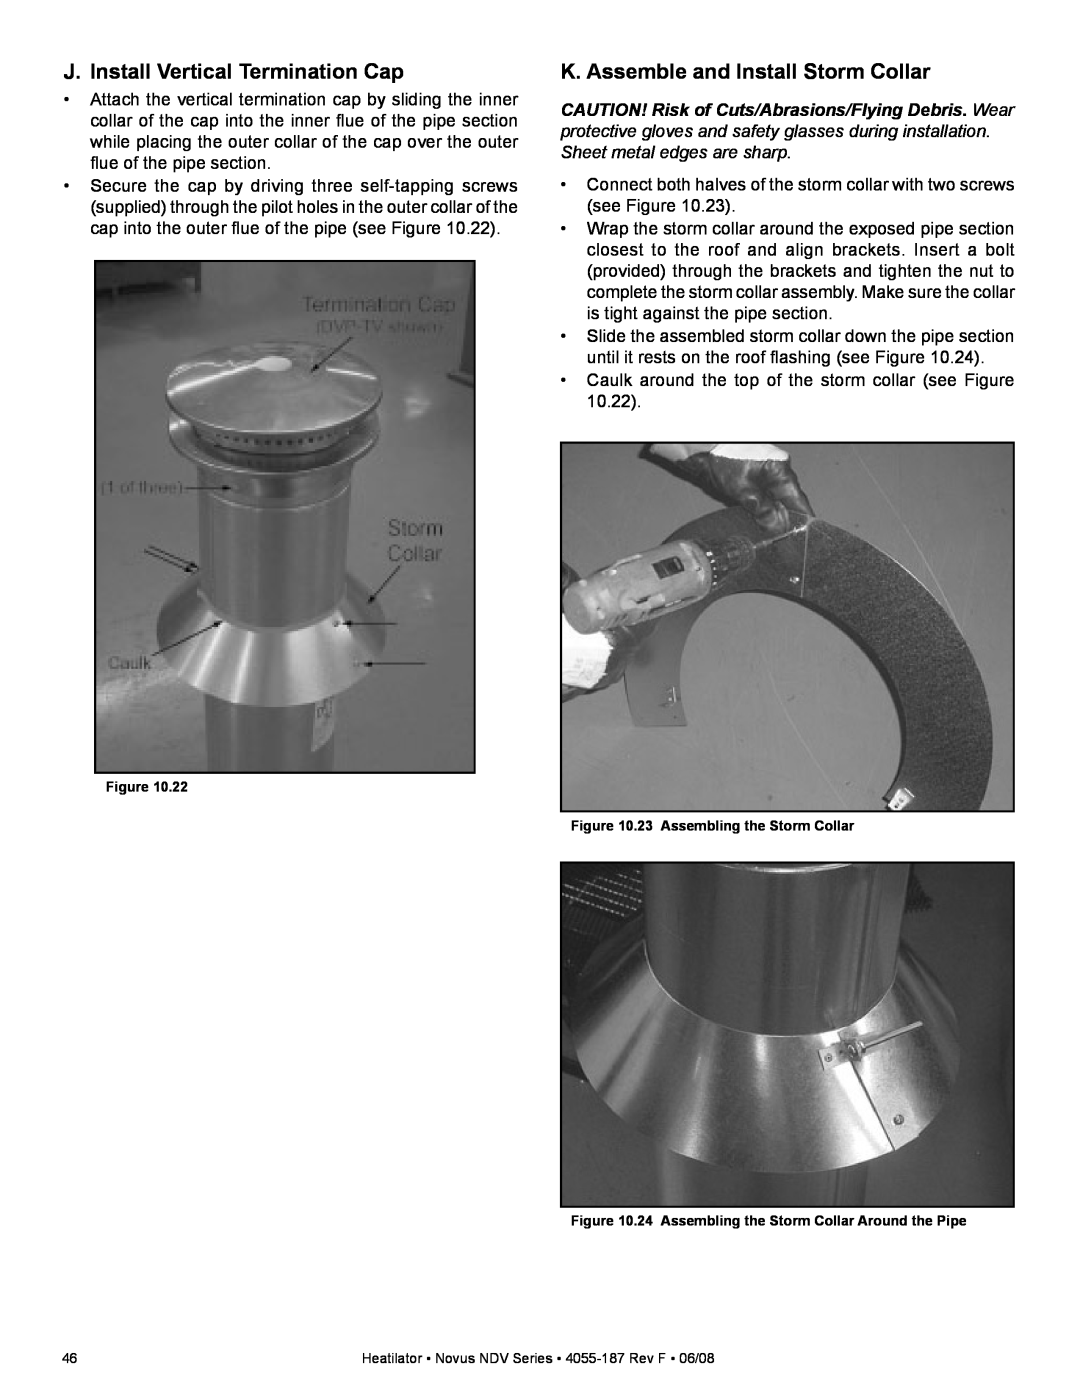 Hearth and Home Technologies NDV4236IL J. Install Vertical Termination Cap, K. Assemble and Install Storm Collar 